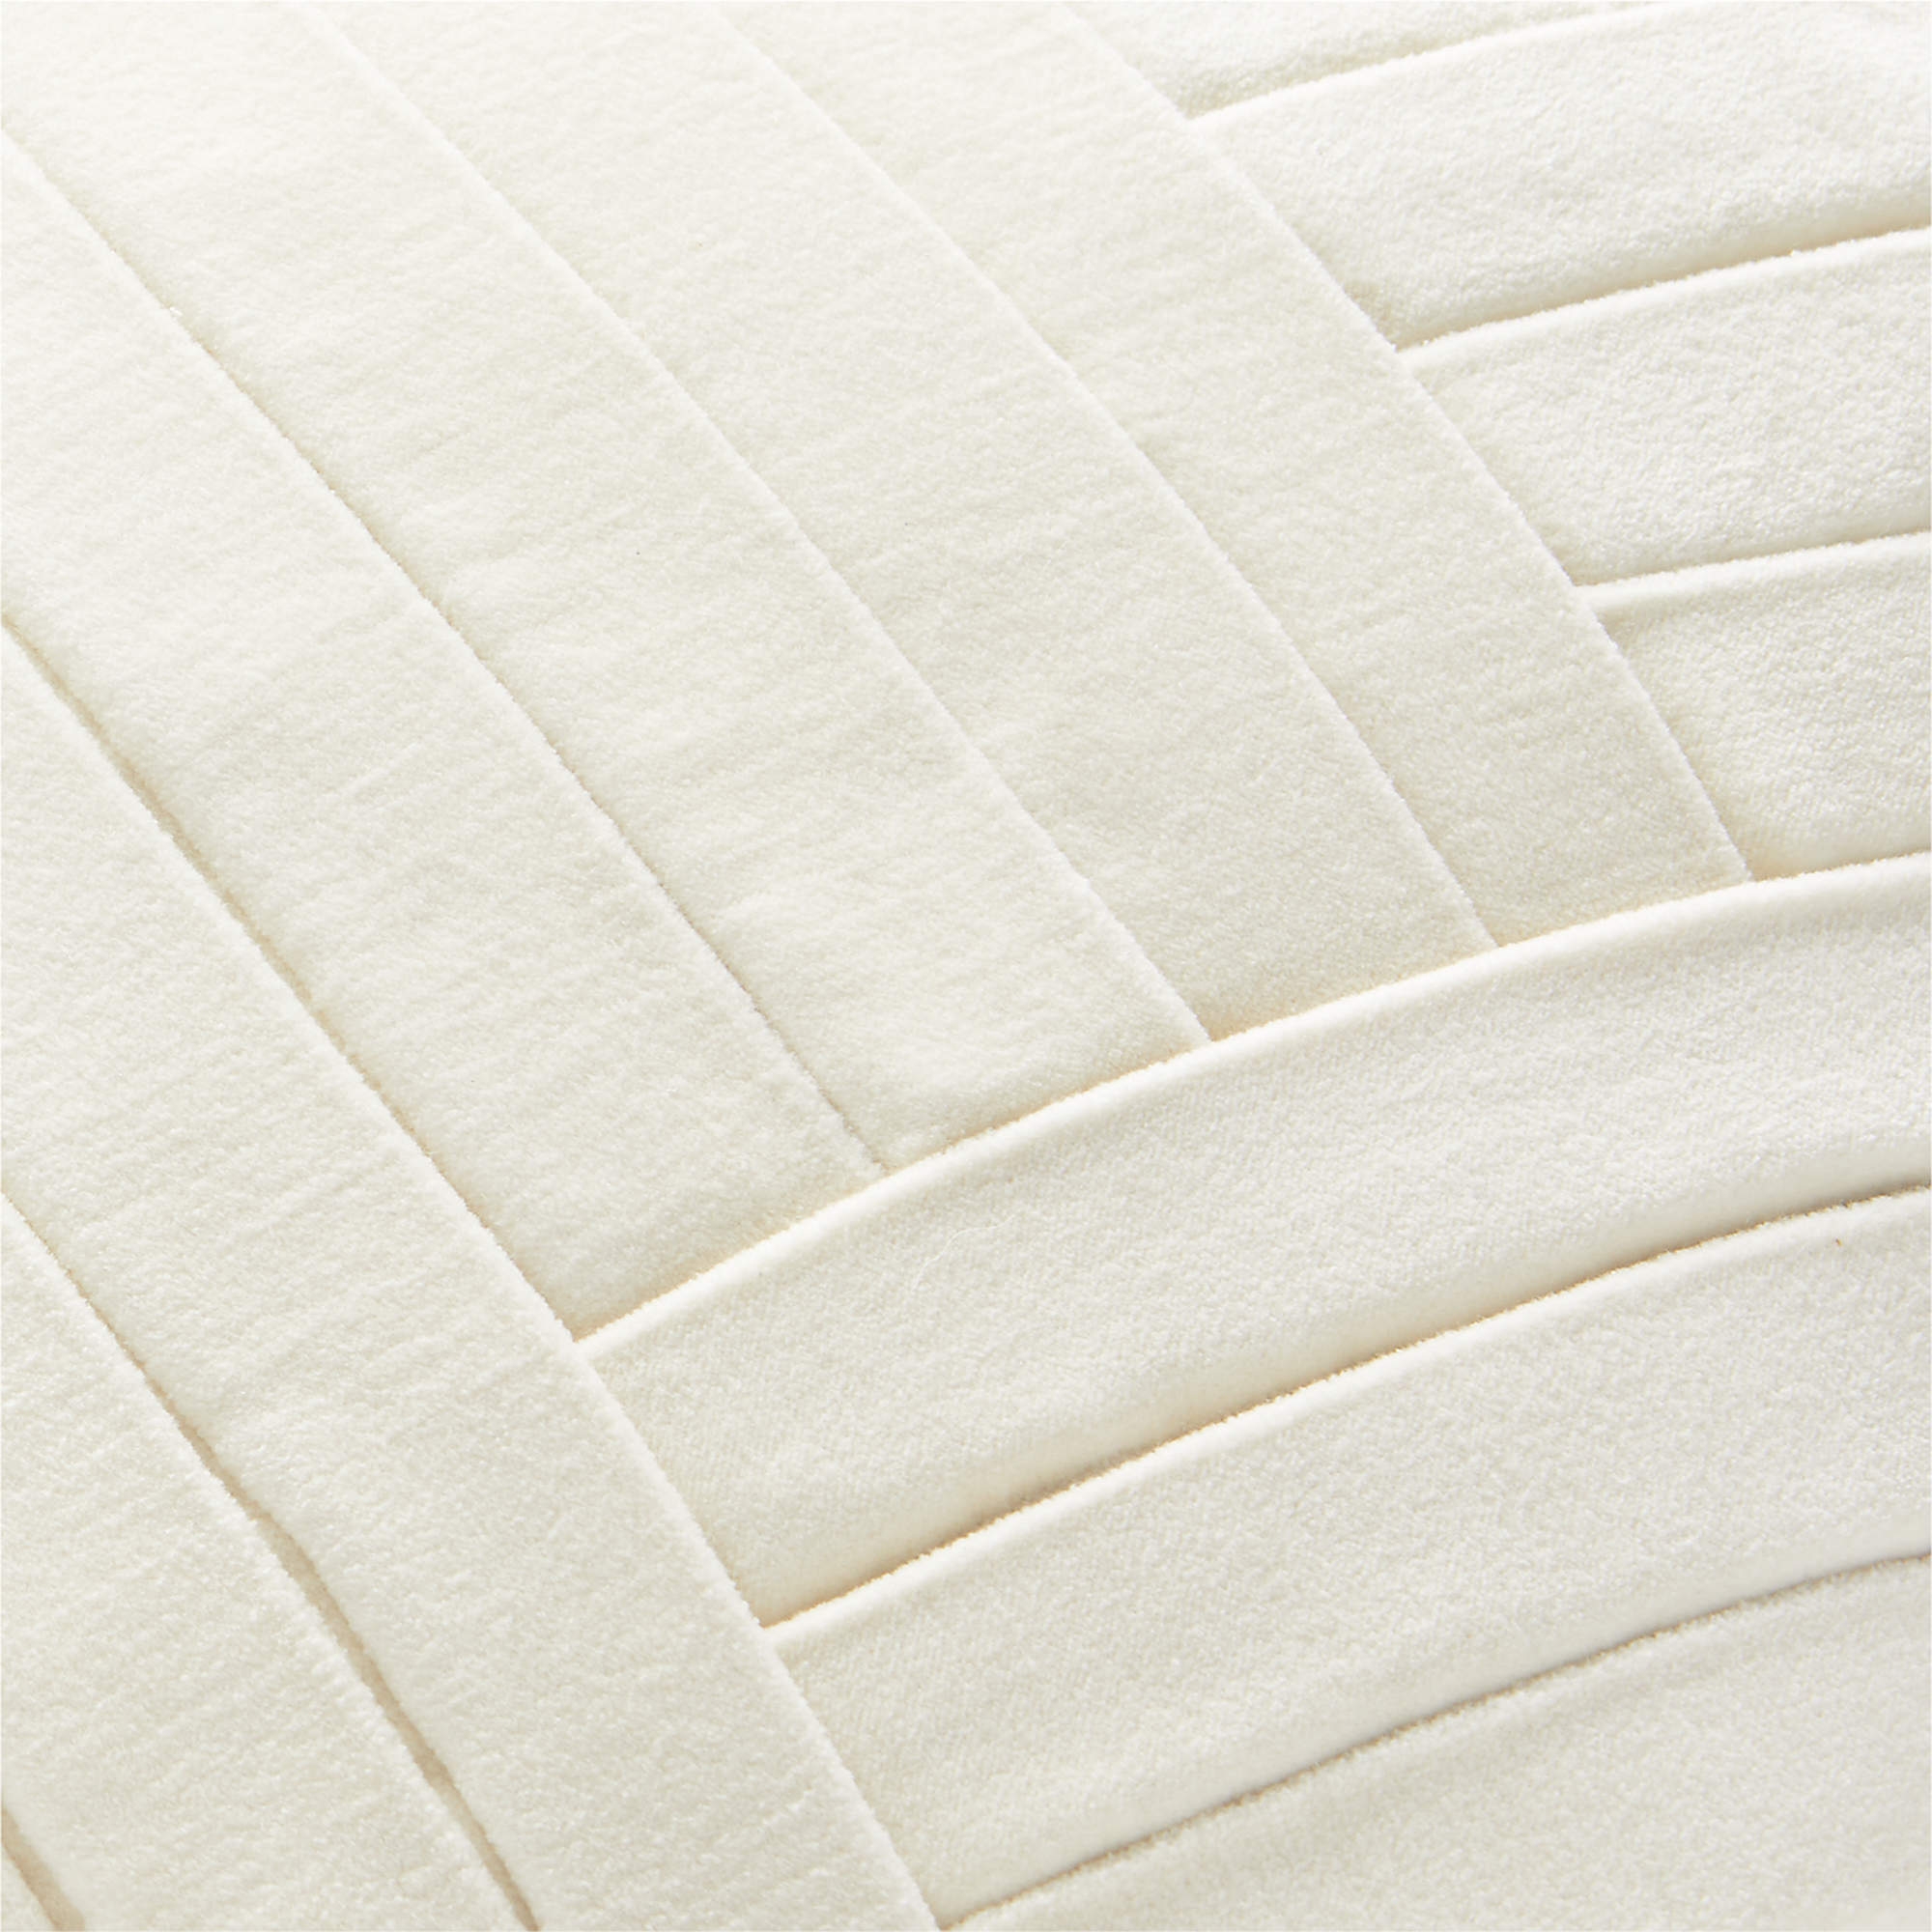 Leger Velvet Pillow Ivory with Feather-Down Insert, 18" x 18" - Image 3